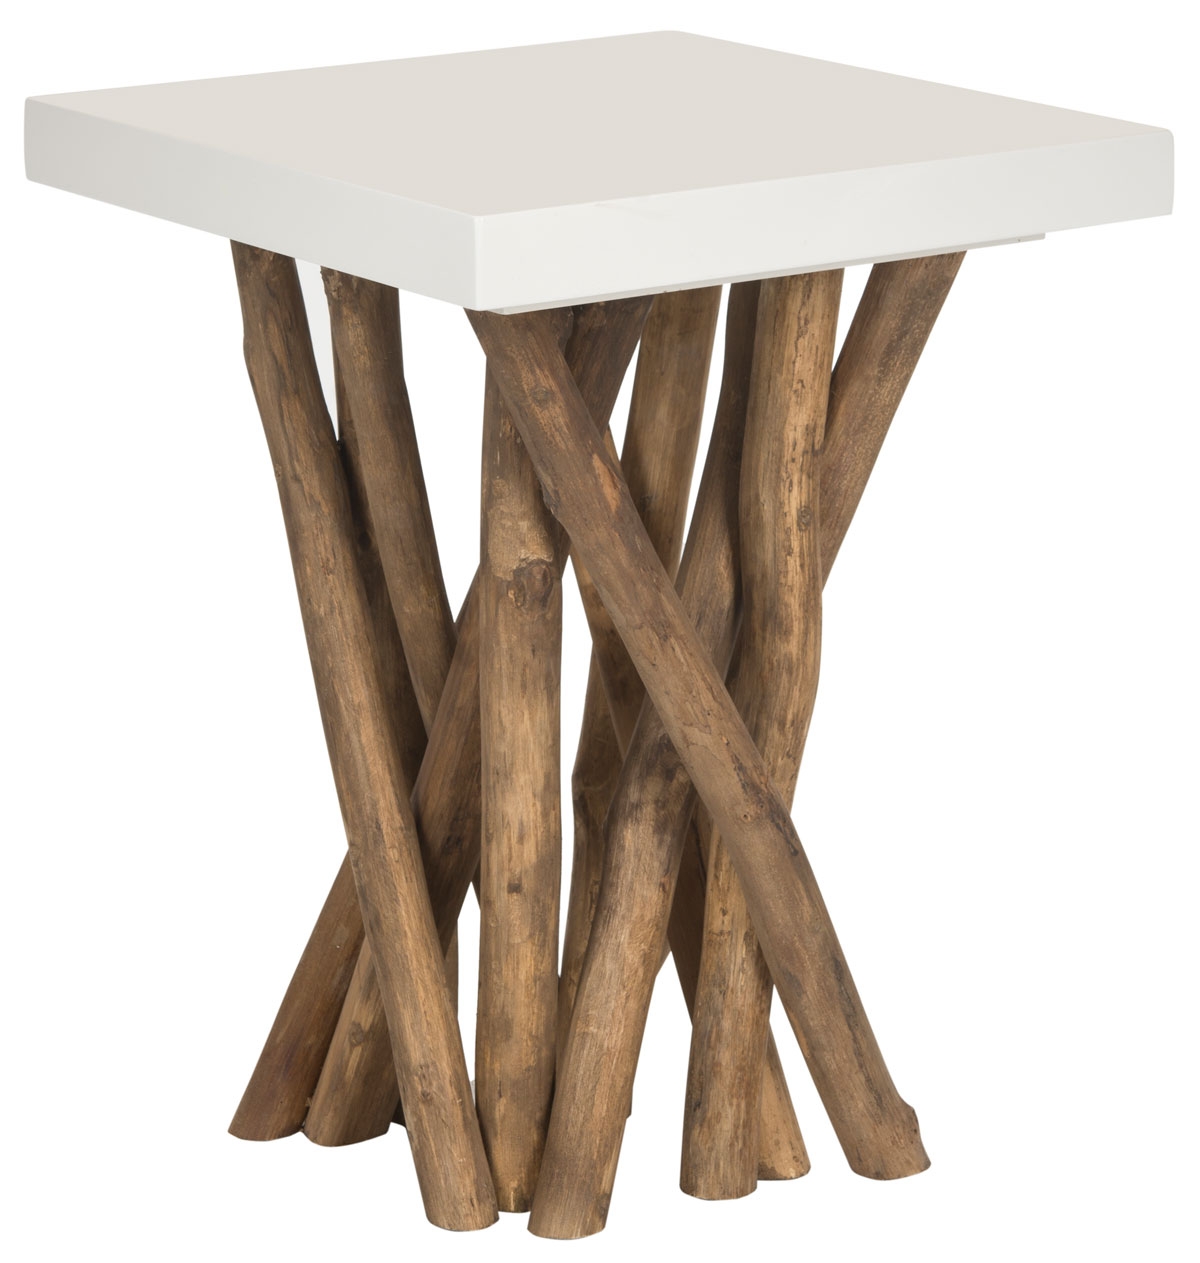 Hartwick Branched Side Table - White/Natural - Arlo Home - Image 1